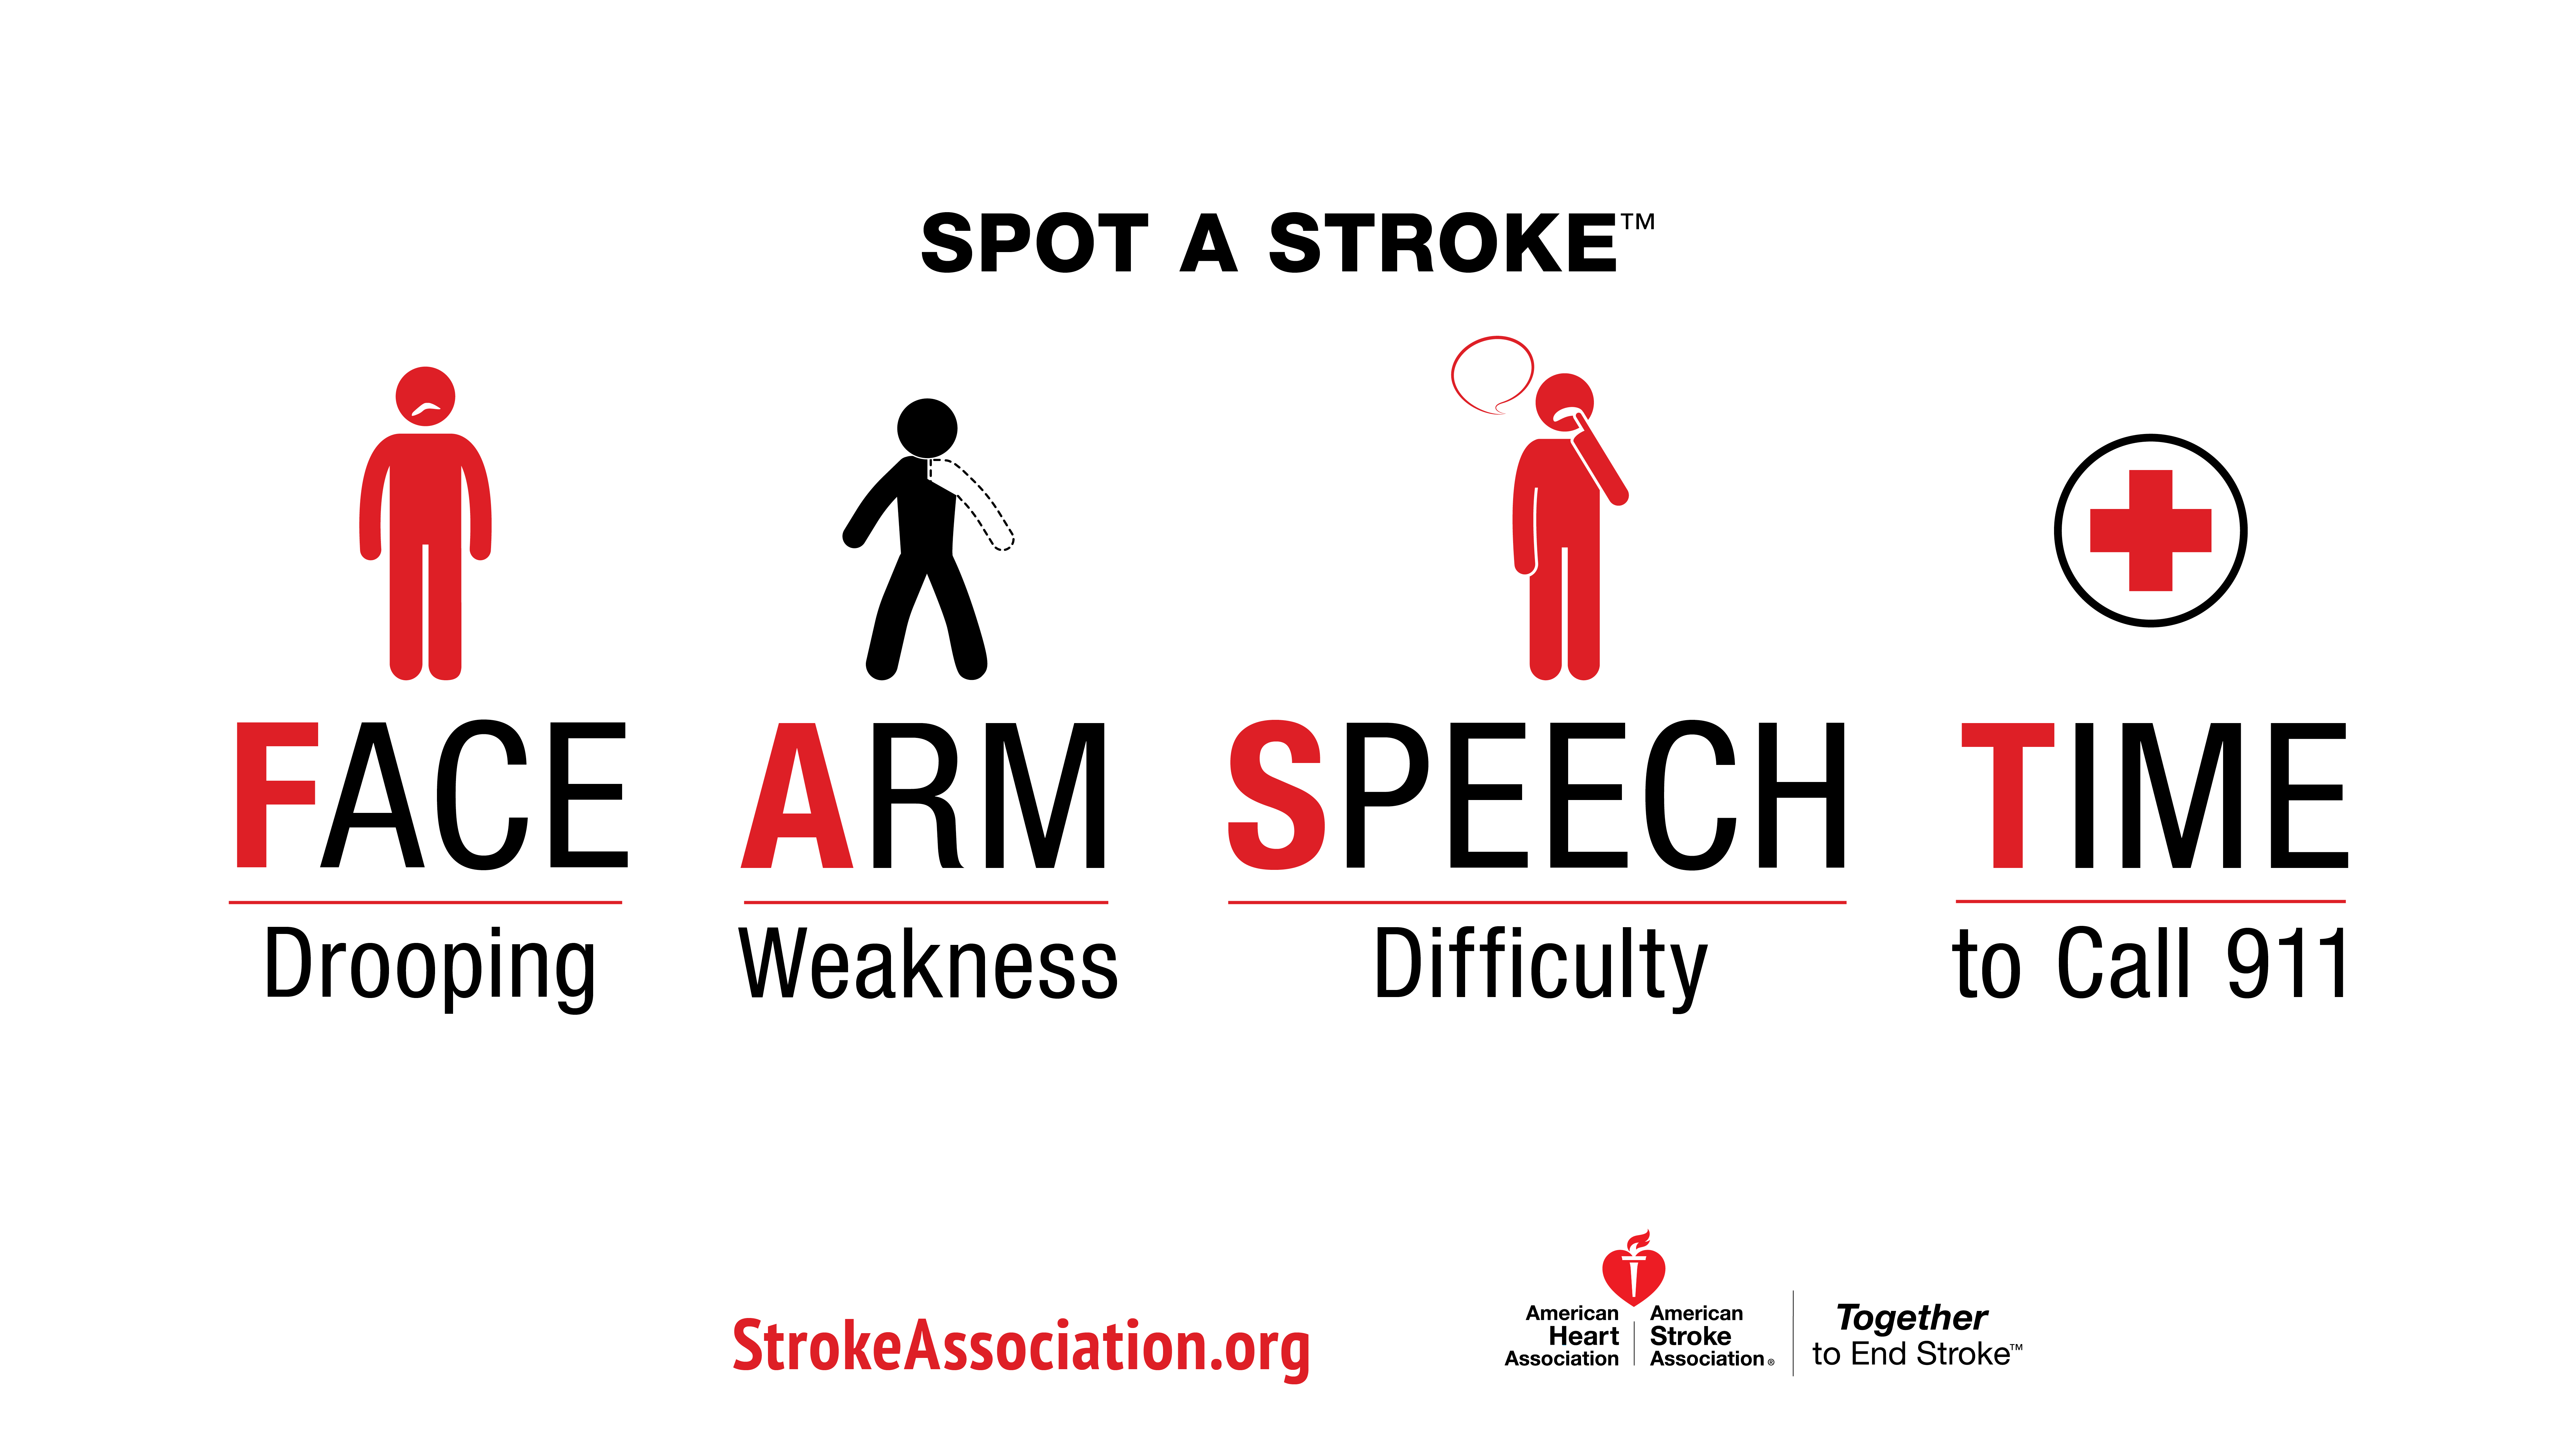 Mayo Clinic Radio: May is American Stroke Month - Mayo Clinic News Network